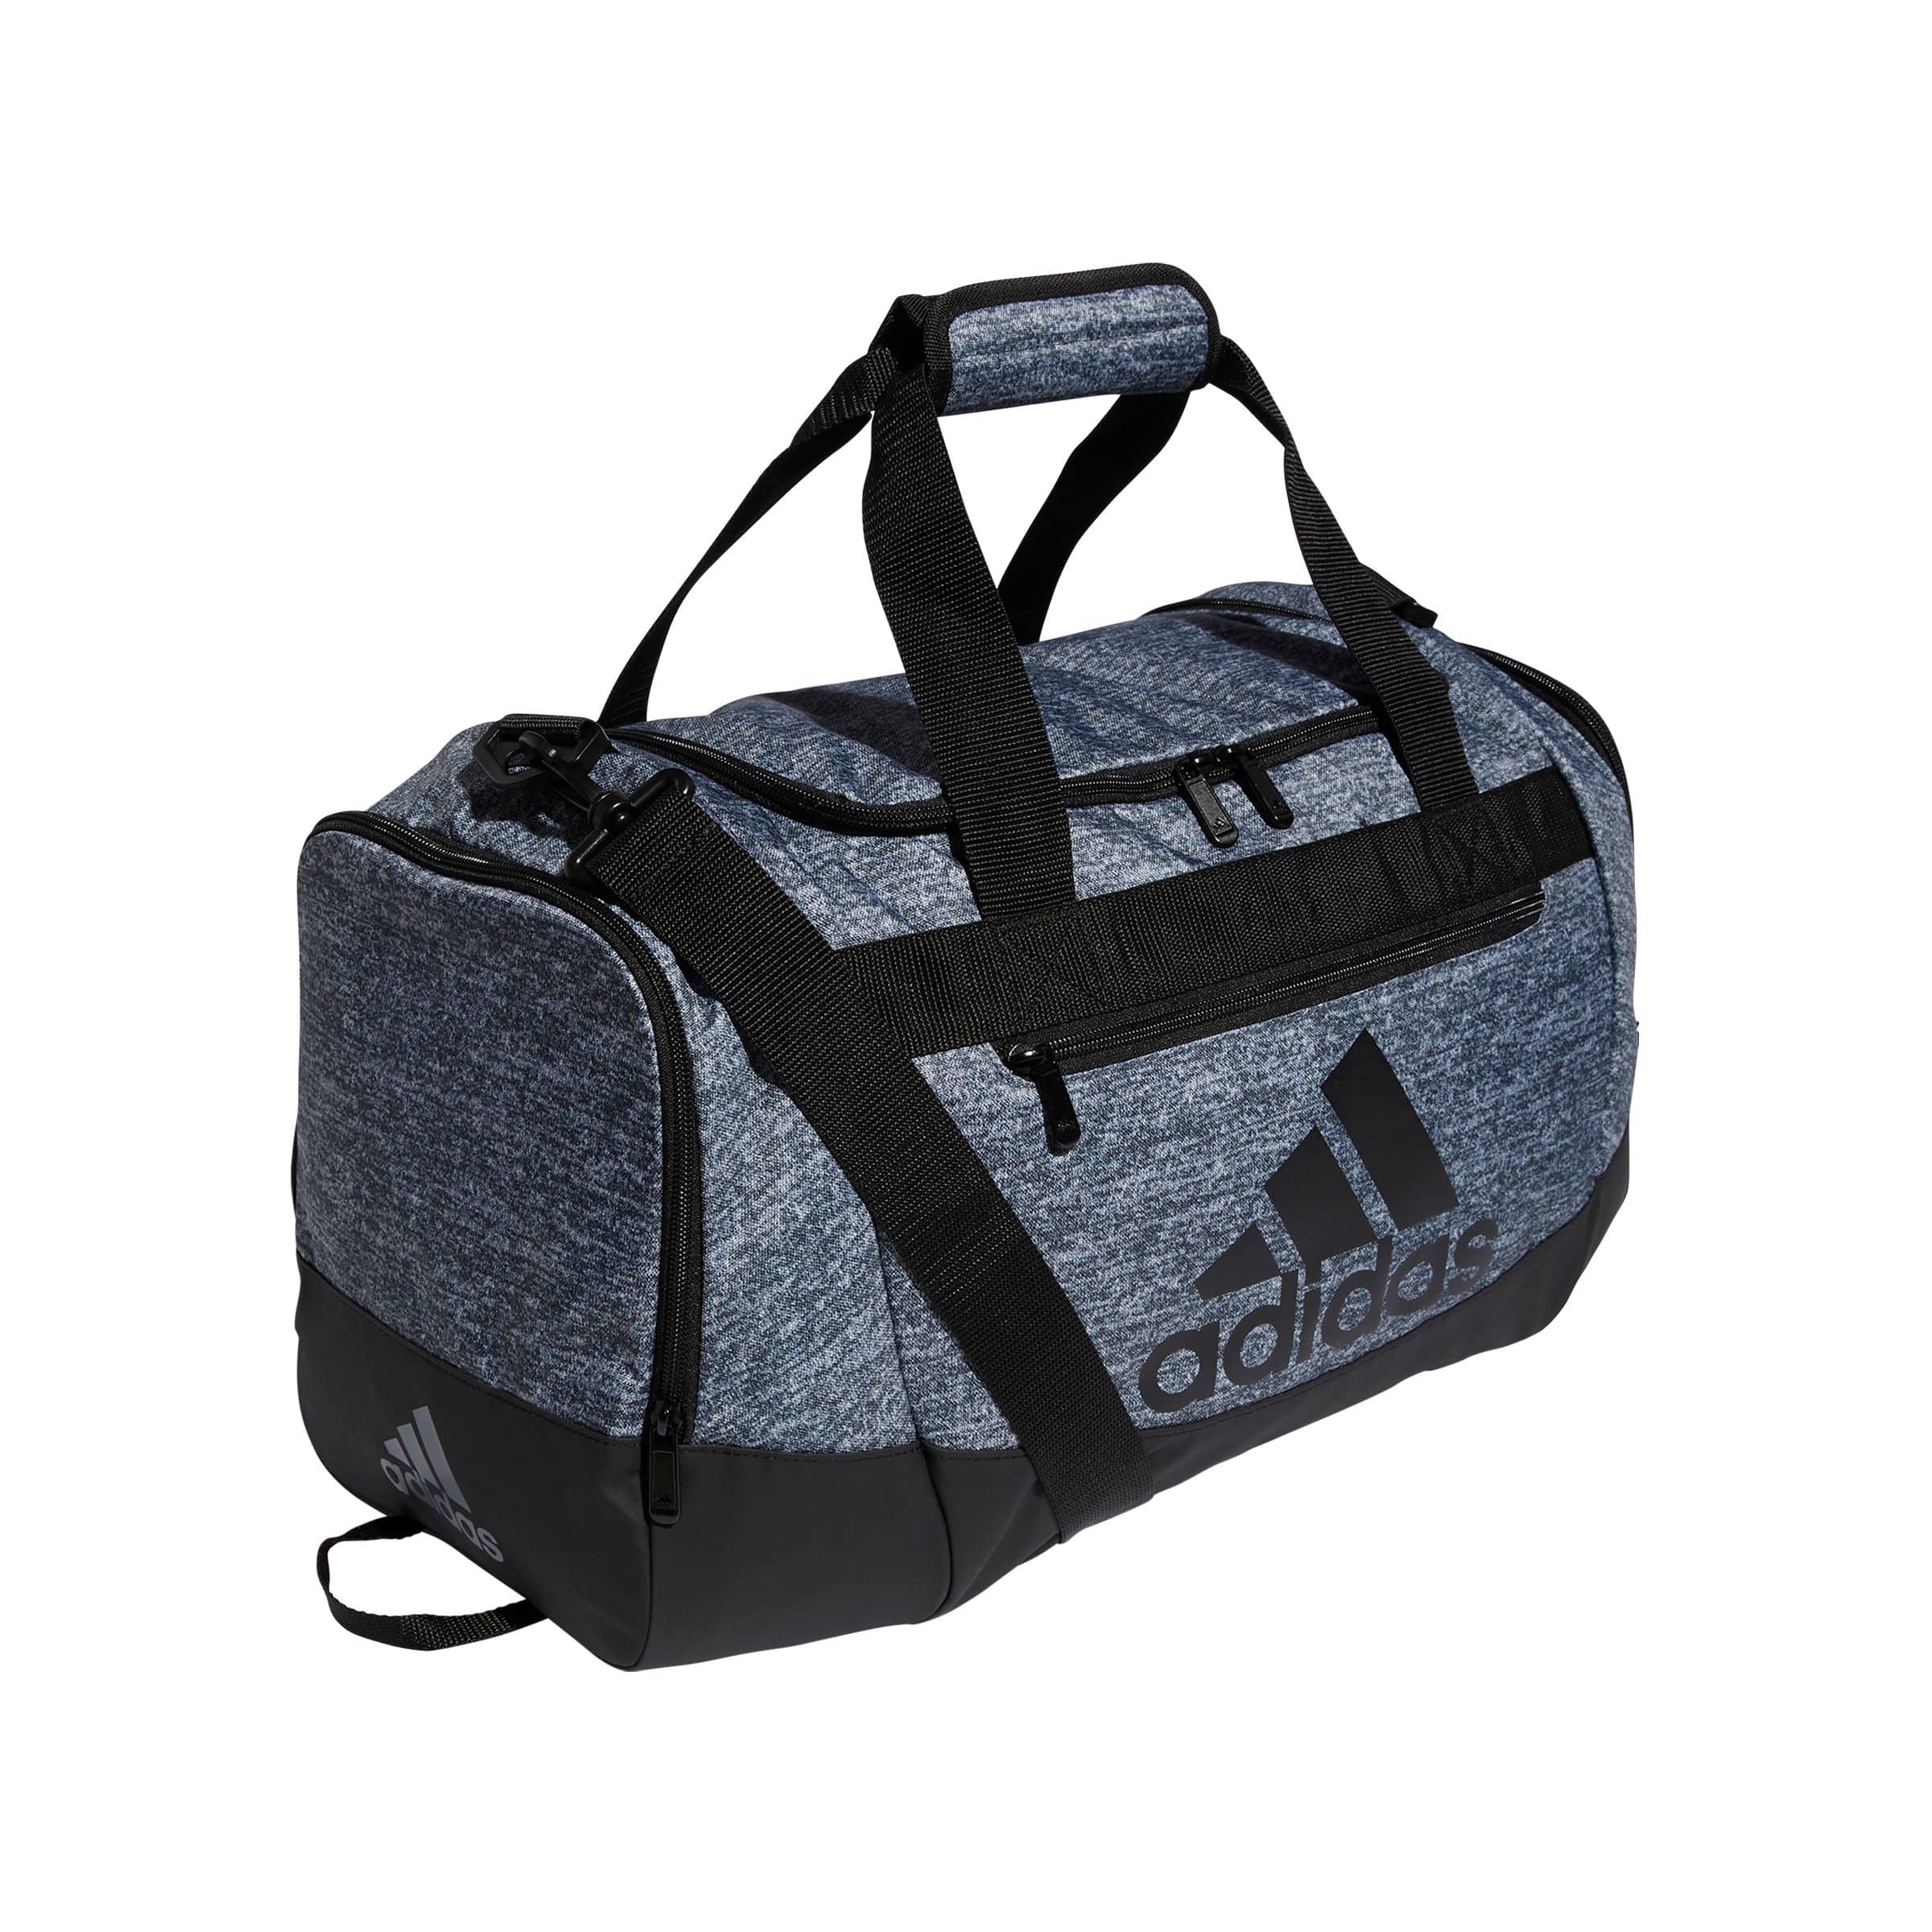 Adidas Gym Bags - Buy Adidas Gym Bags online in India